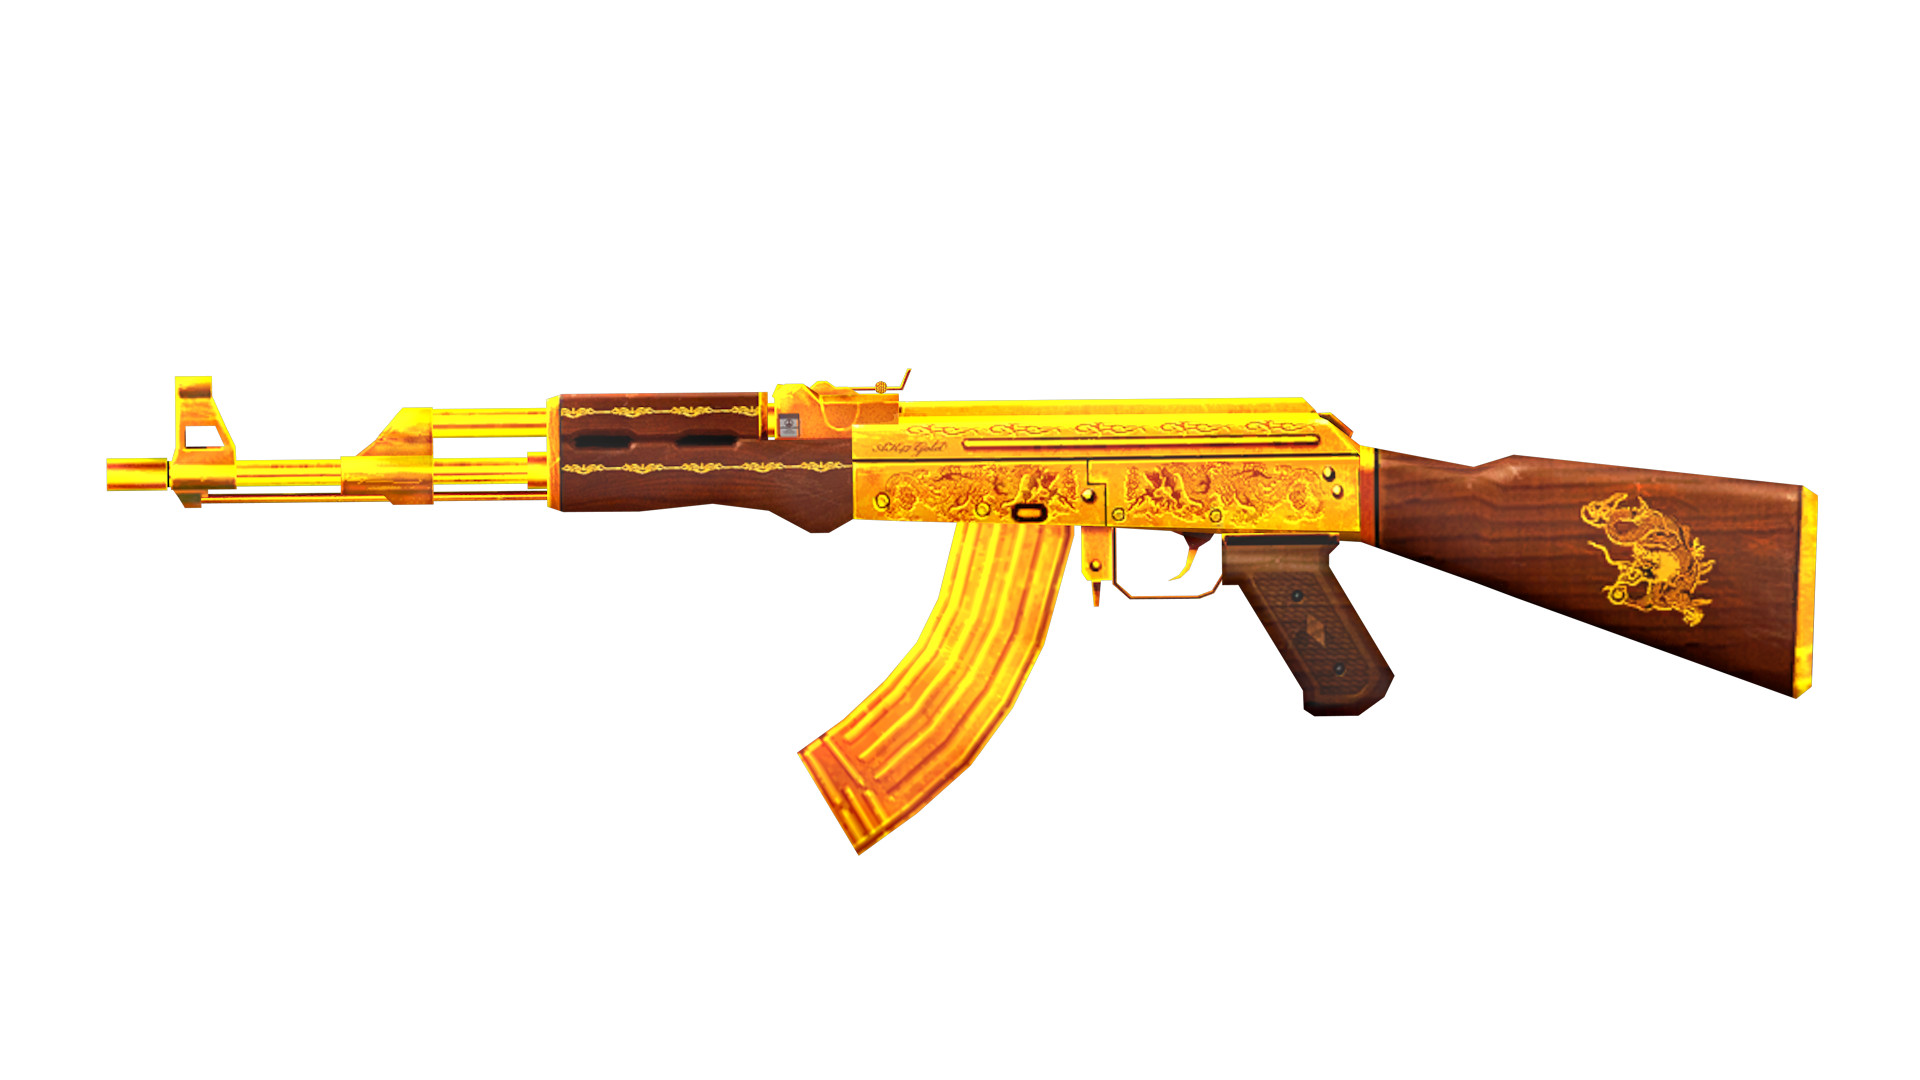 90 Gold Ak 47 Stock Photos Pictures  RoyaltyFree Images  iStock